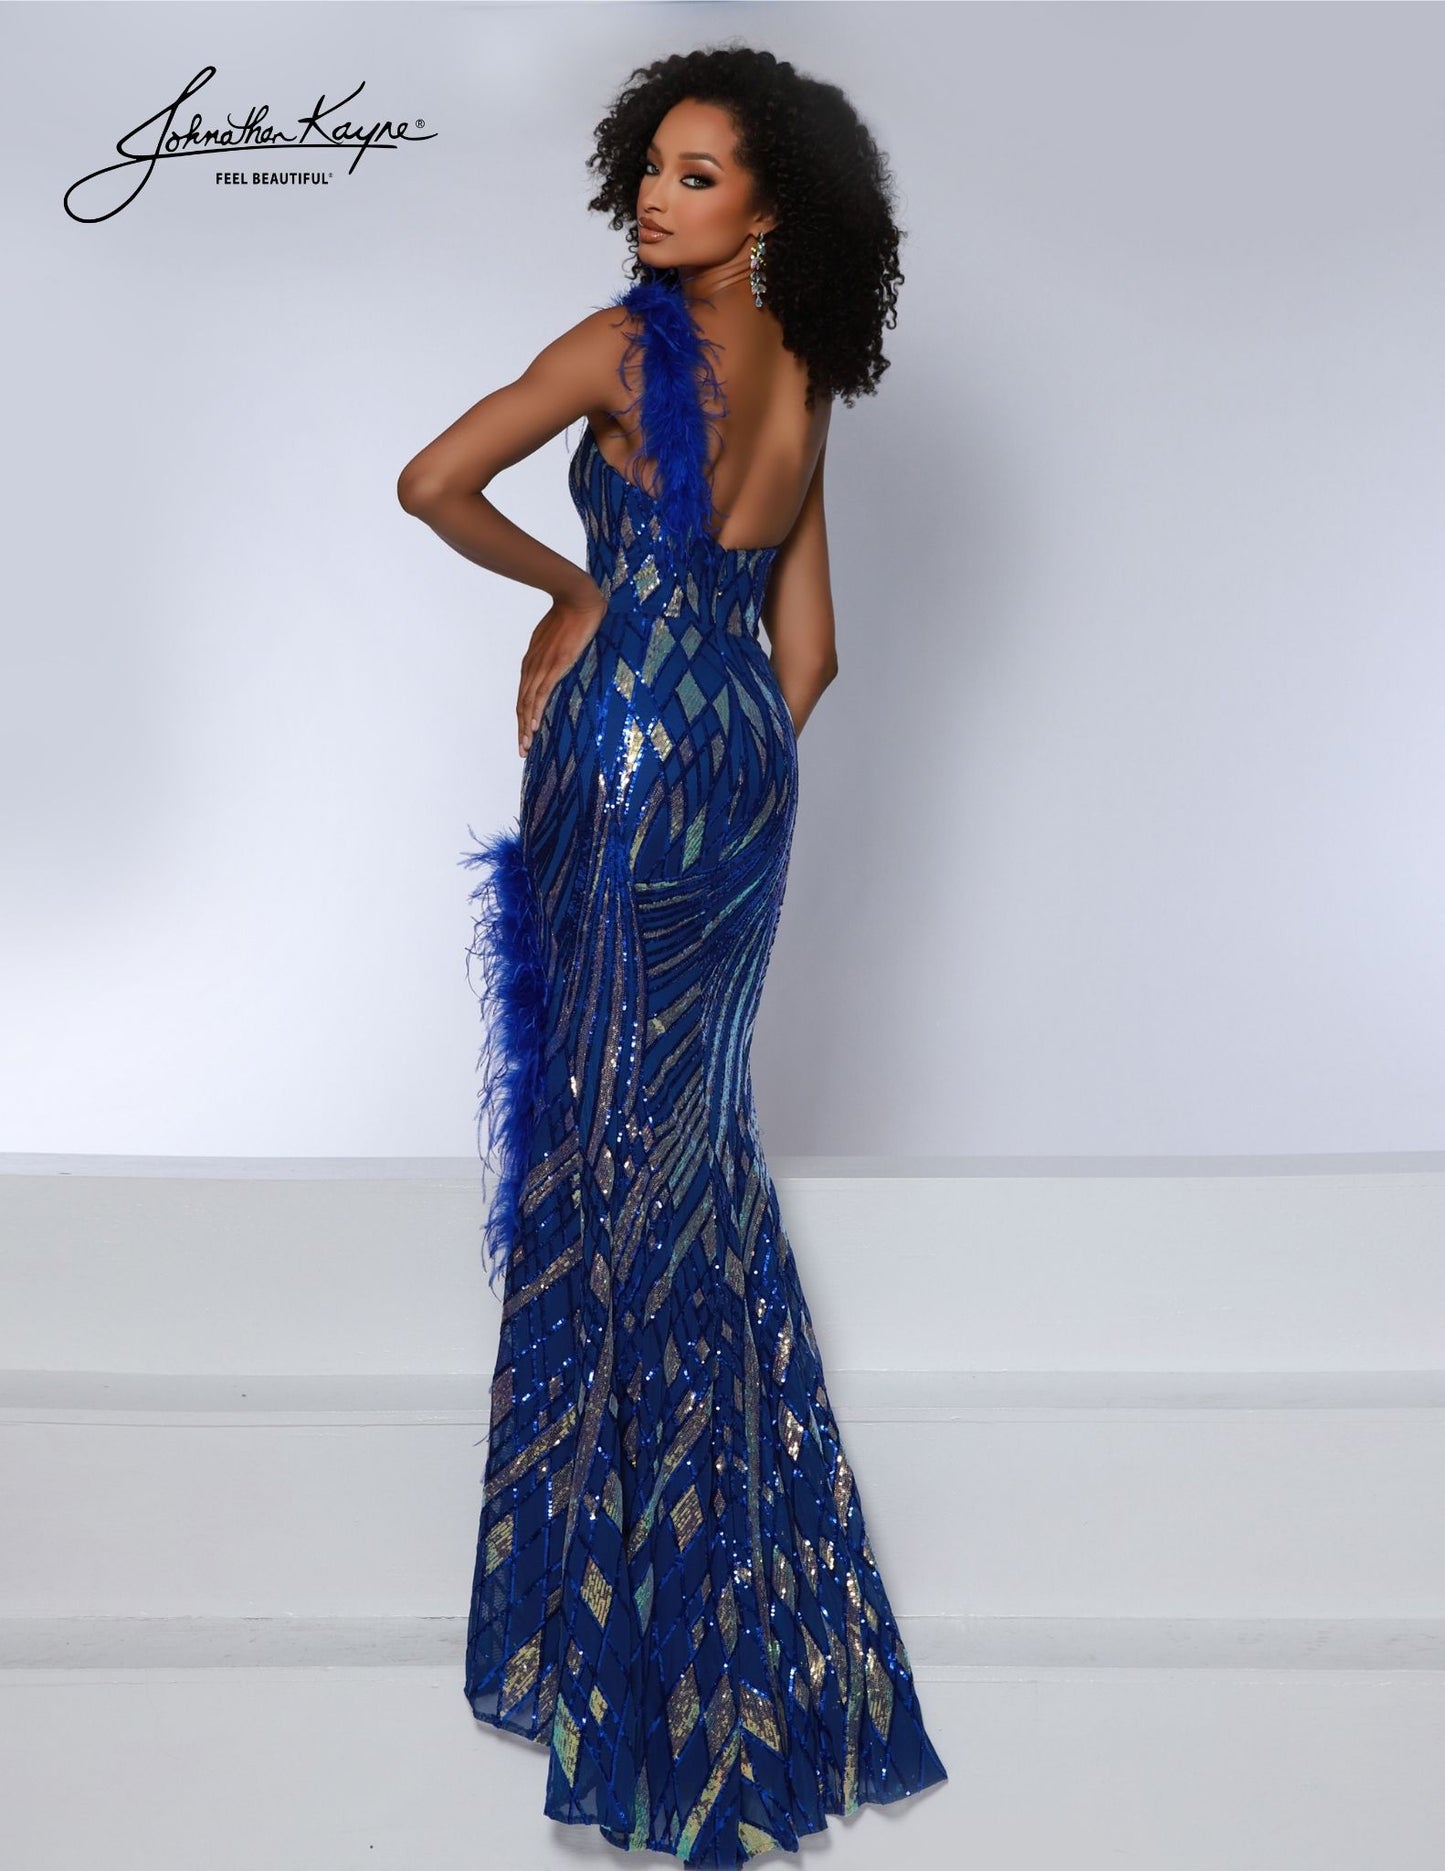 Look stunning in the Johnathan Kayne 2844 Long Prom Dress. This fitted one-shoulder gown features a delicate sequin powermesh, slit details feathers for a striking look. Perfect for an elegant night on the town or any formal occasion. Prepare to steal the show! This one-shoulder wonder is adorned with mesmerizing sequins that shimmer and sparkle, ensuring you radiate elegance and glamour. 